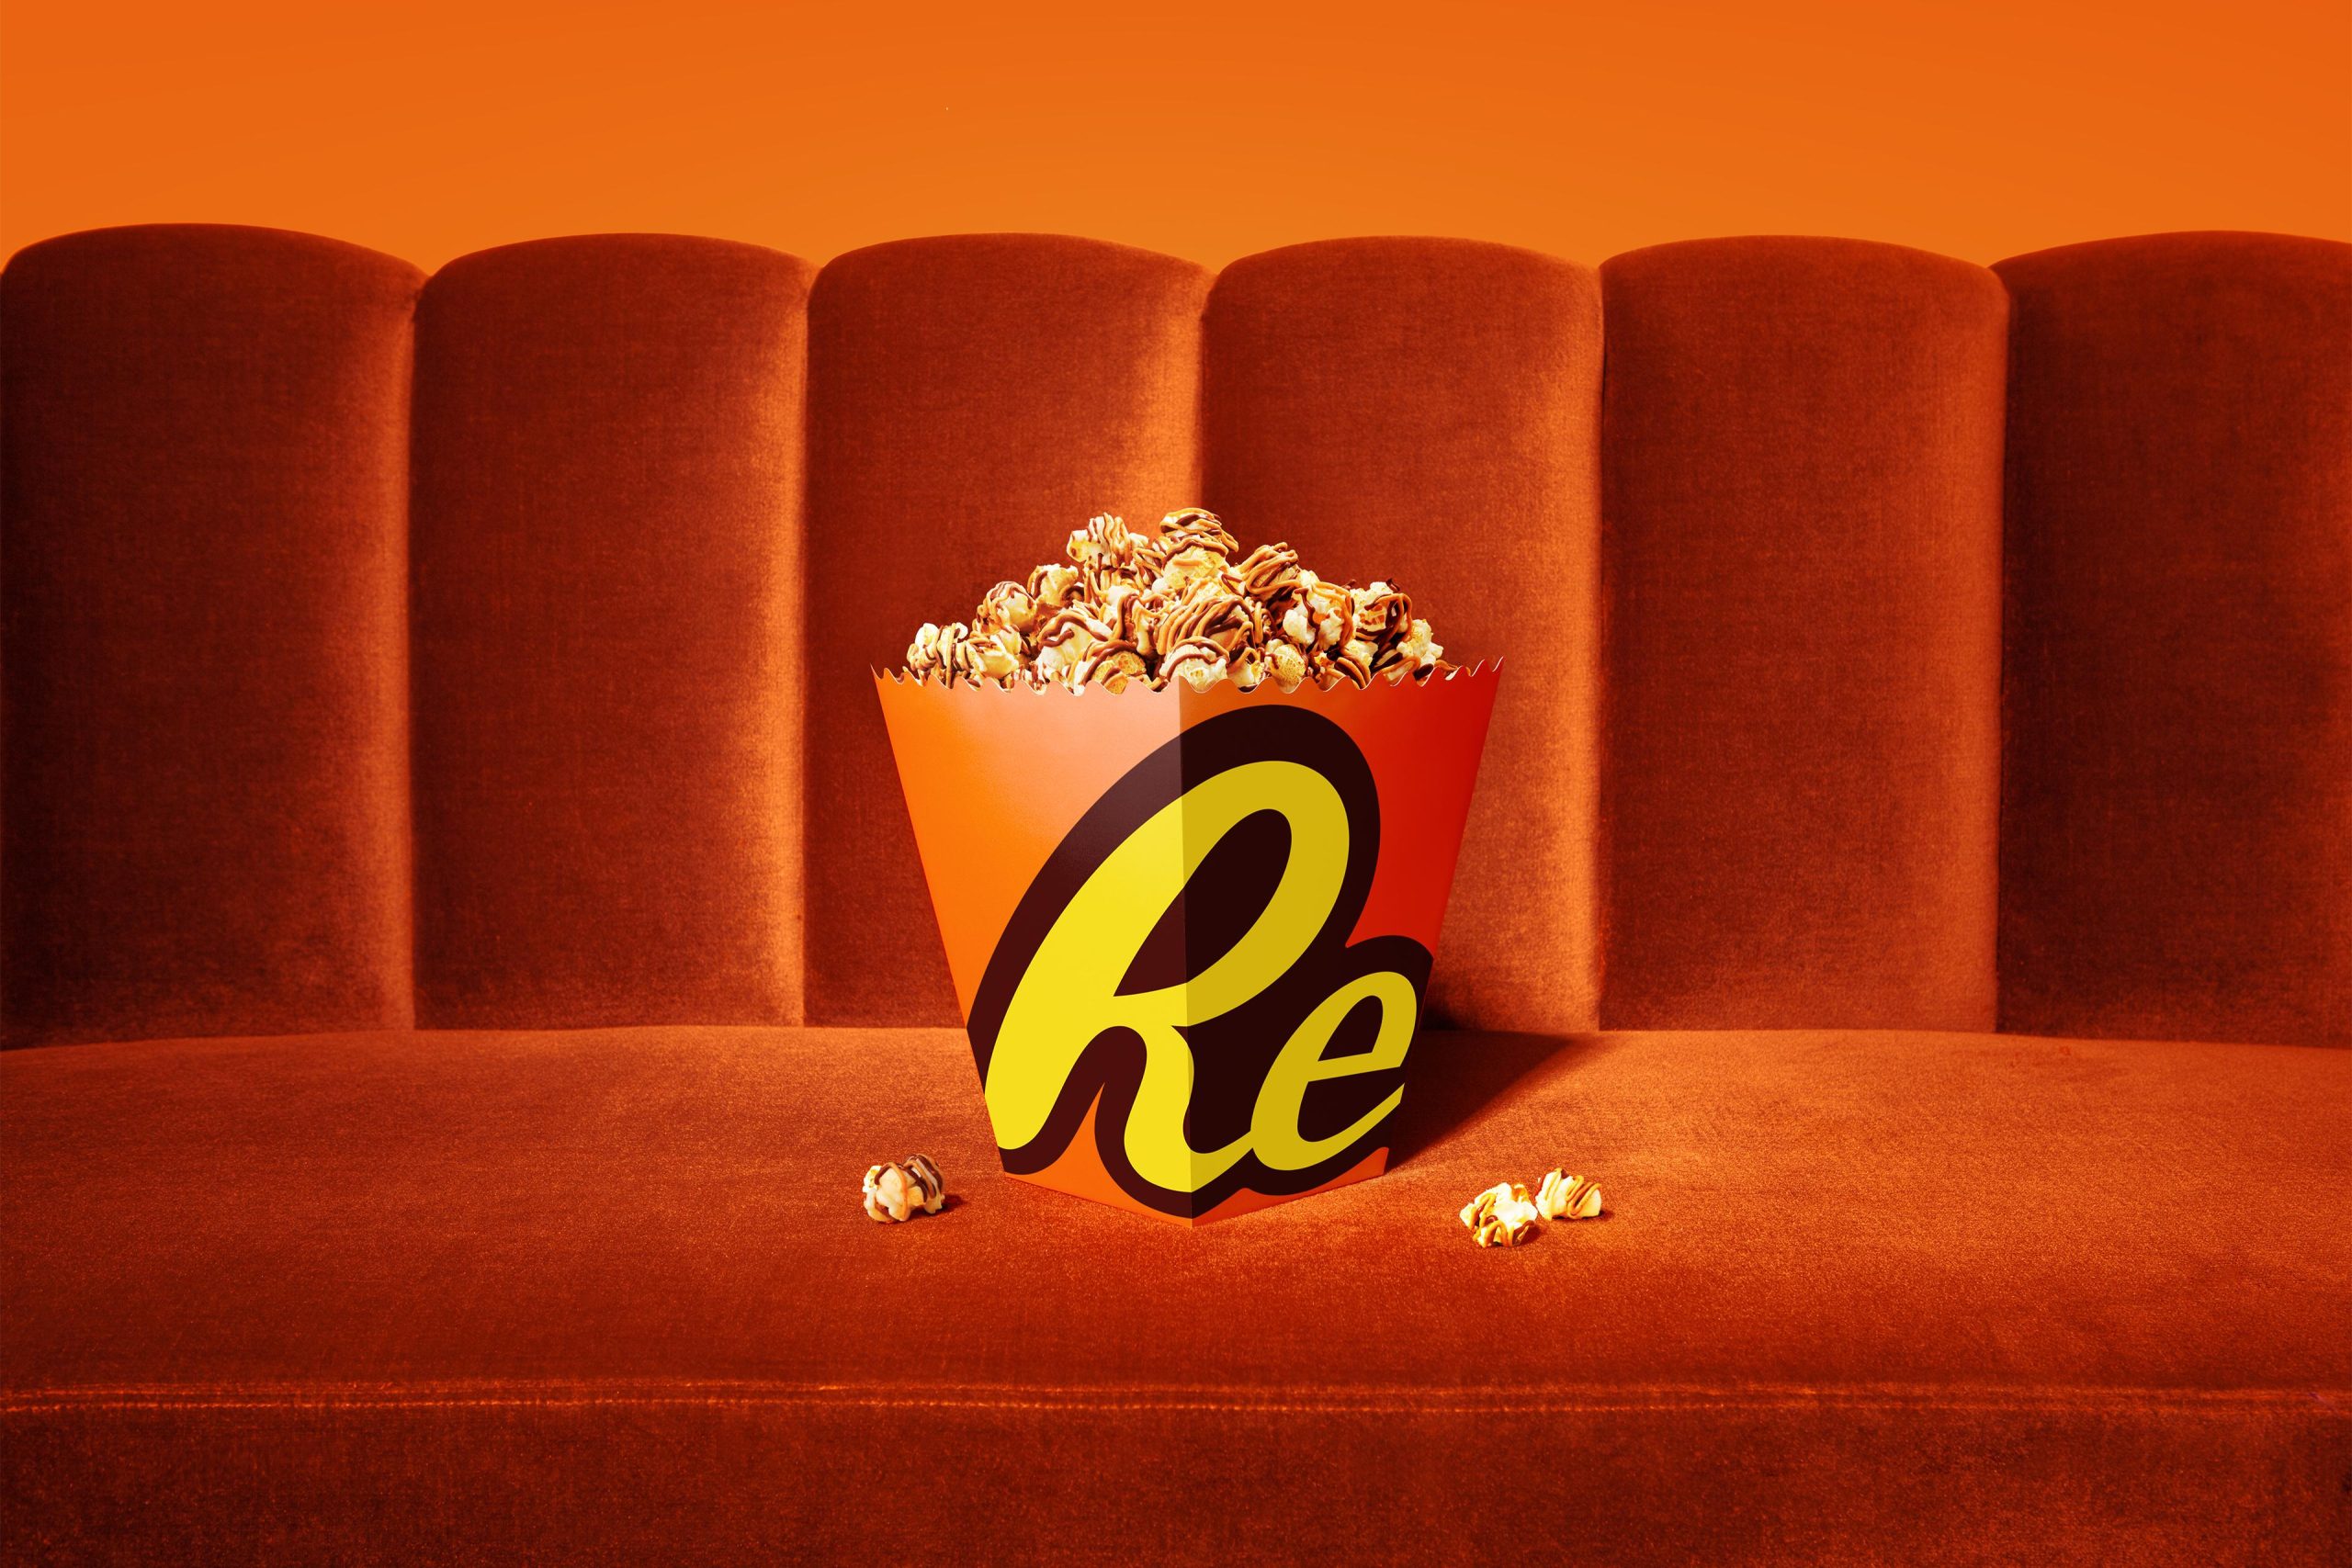 Reese’s Popcorn Turns the Most Iconic Movie Snack Into the Star of the Show